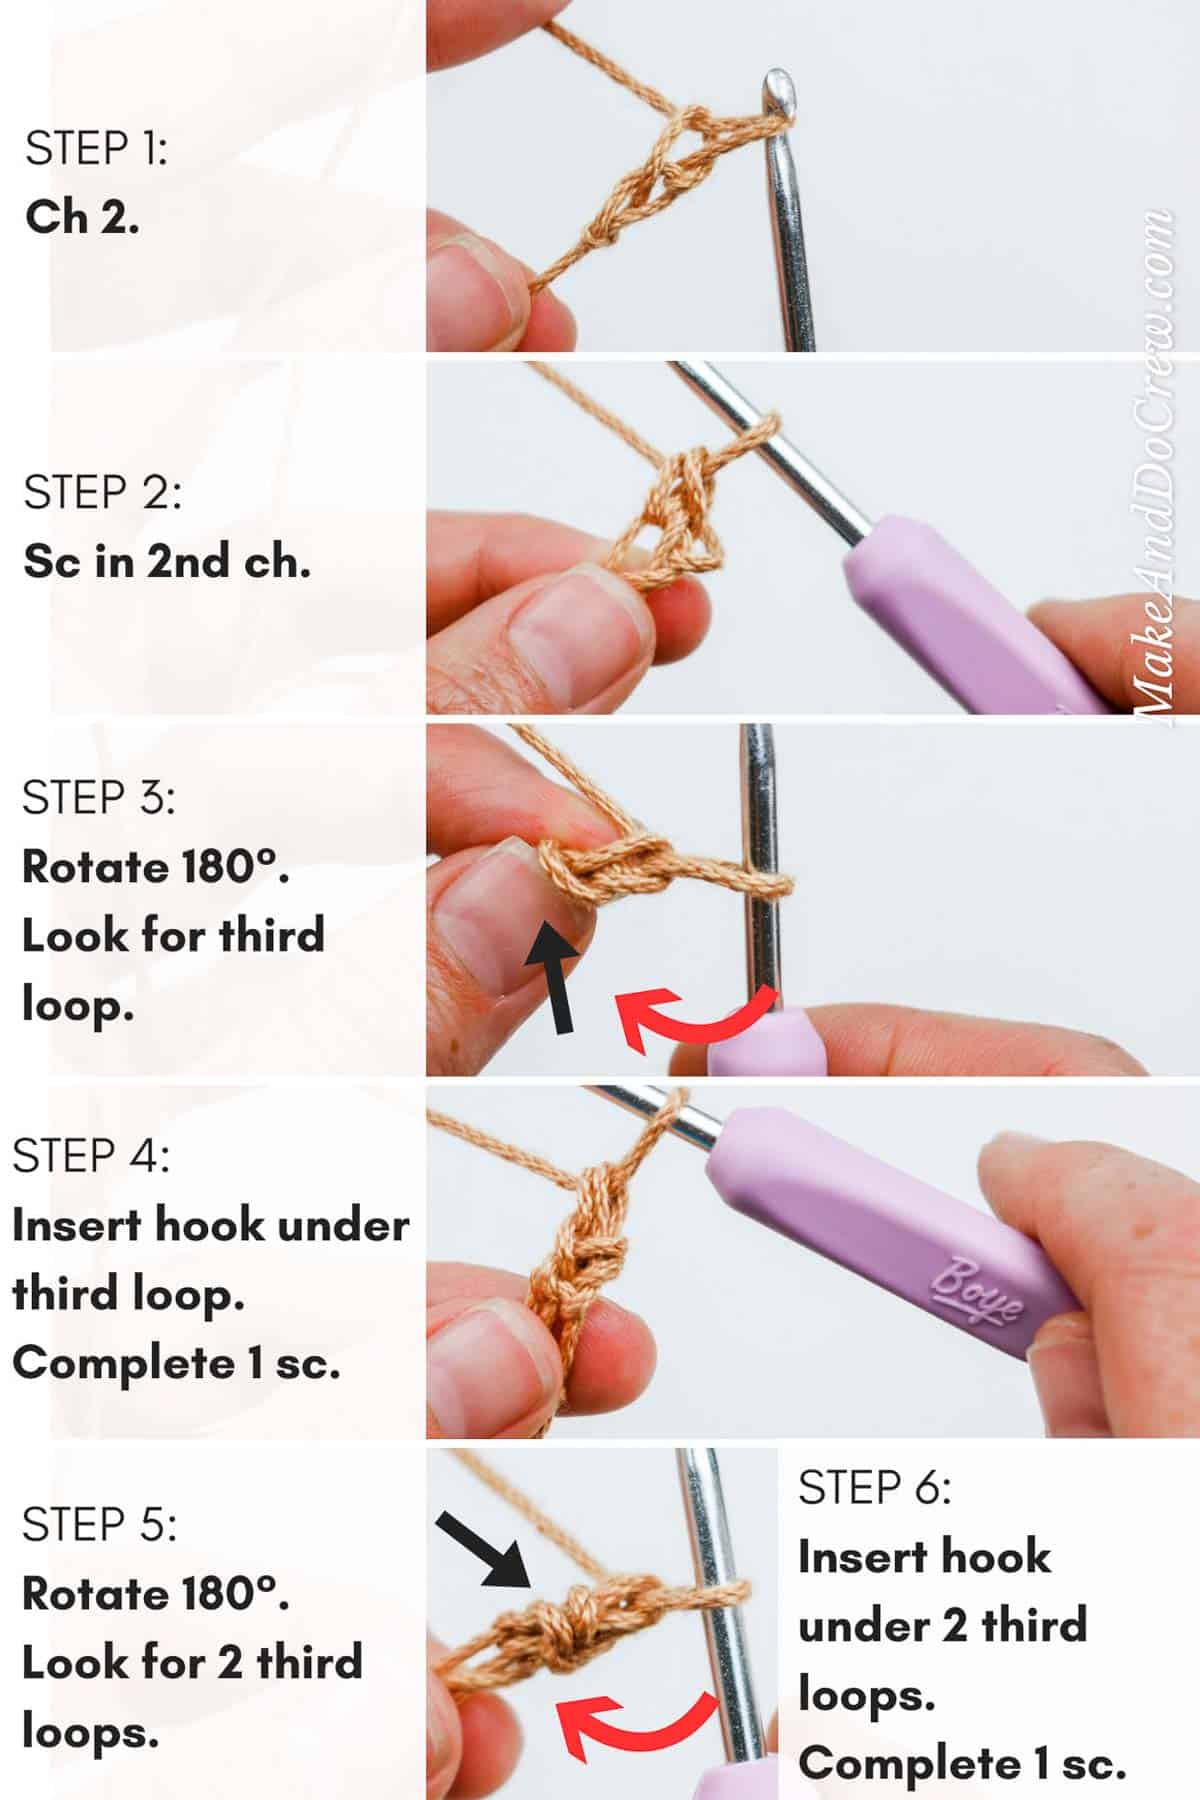 This image shows a crochet tutorial for a roman cord.